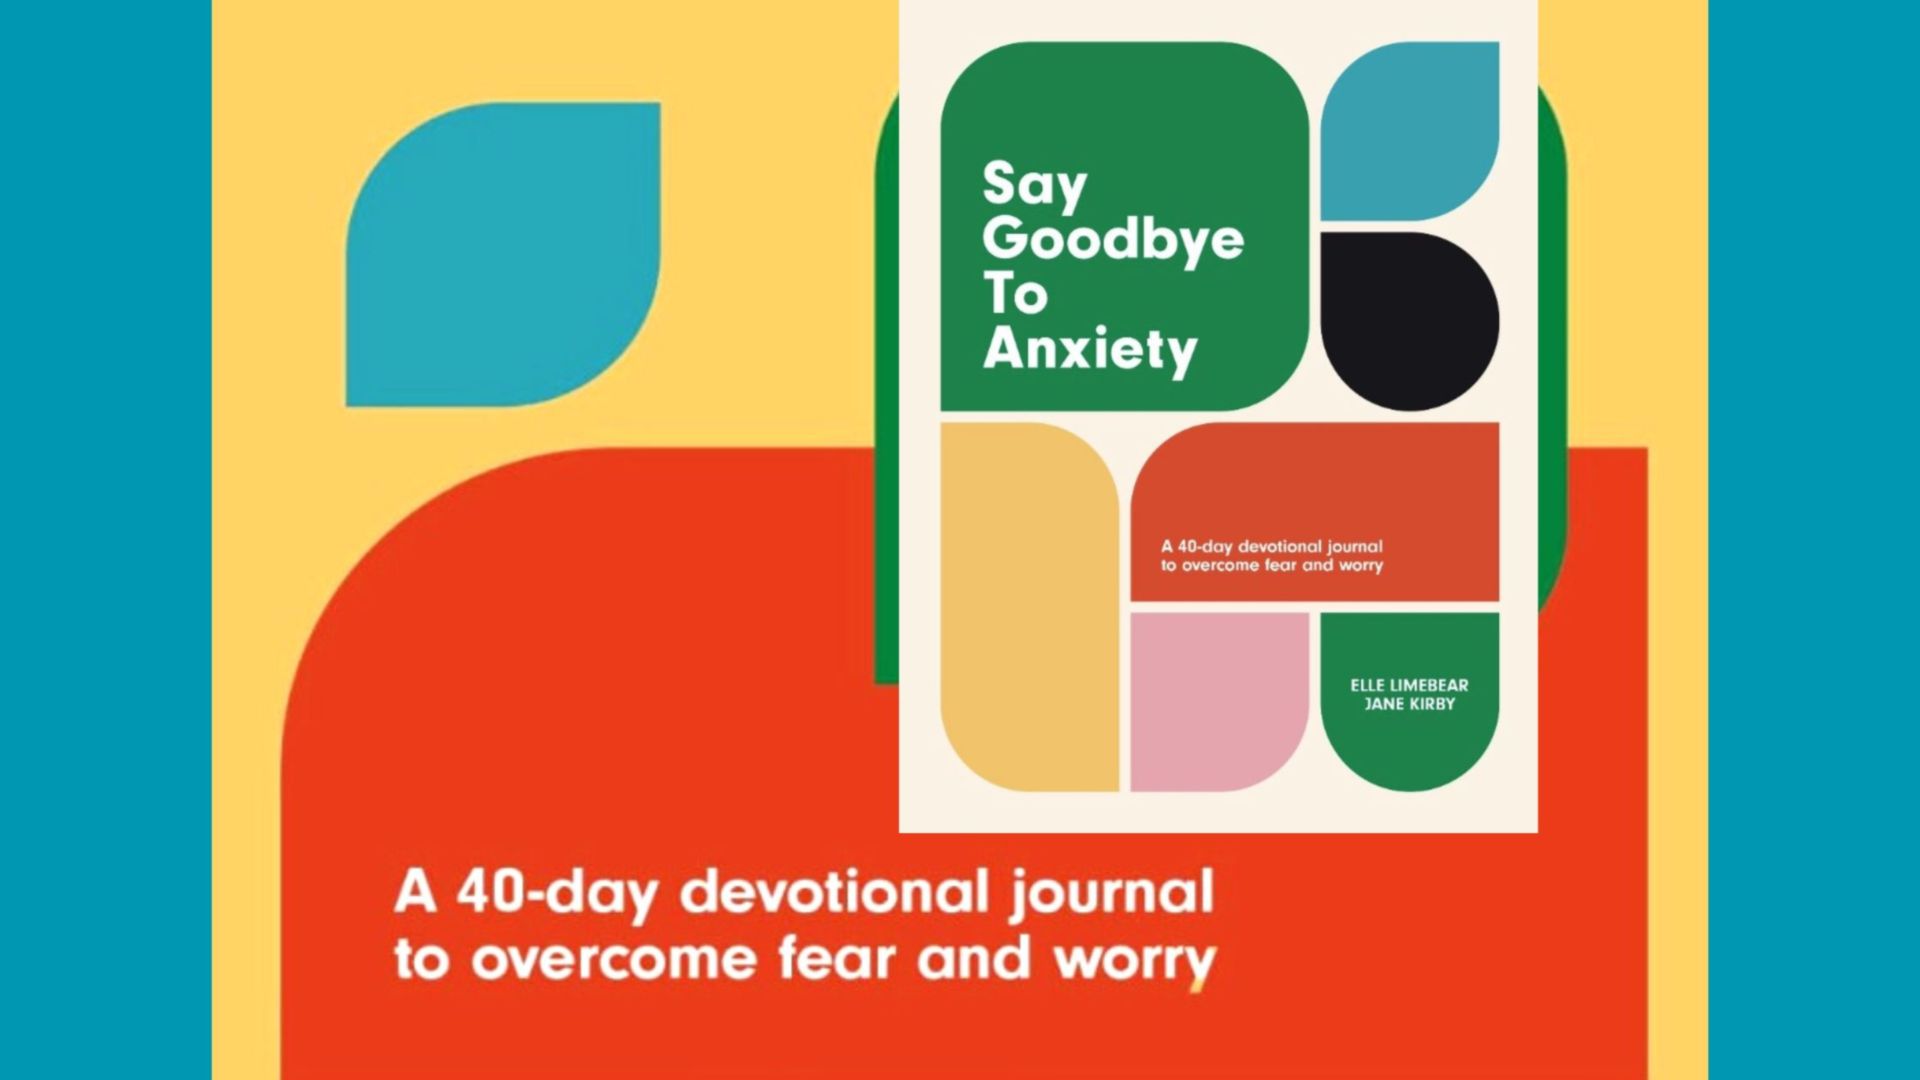 An interview with the authors of the book 'Say Goodbye to Anxiety'